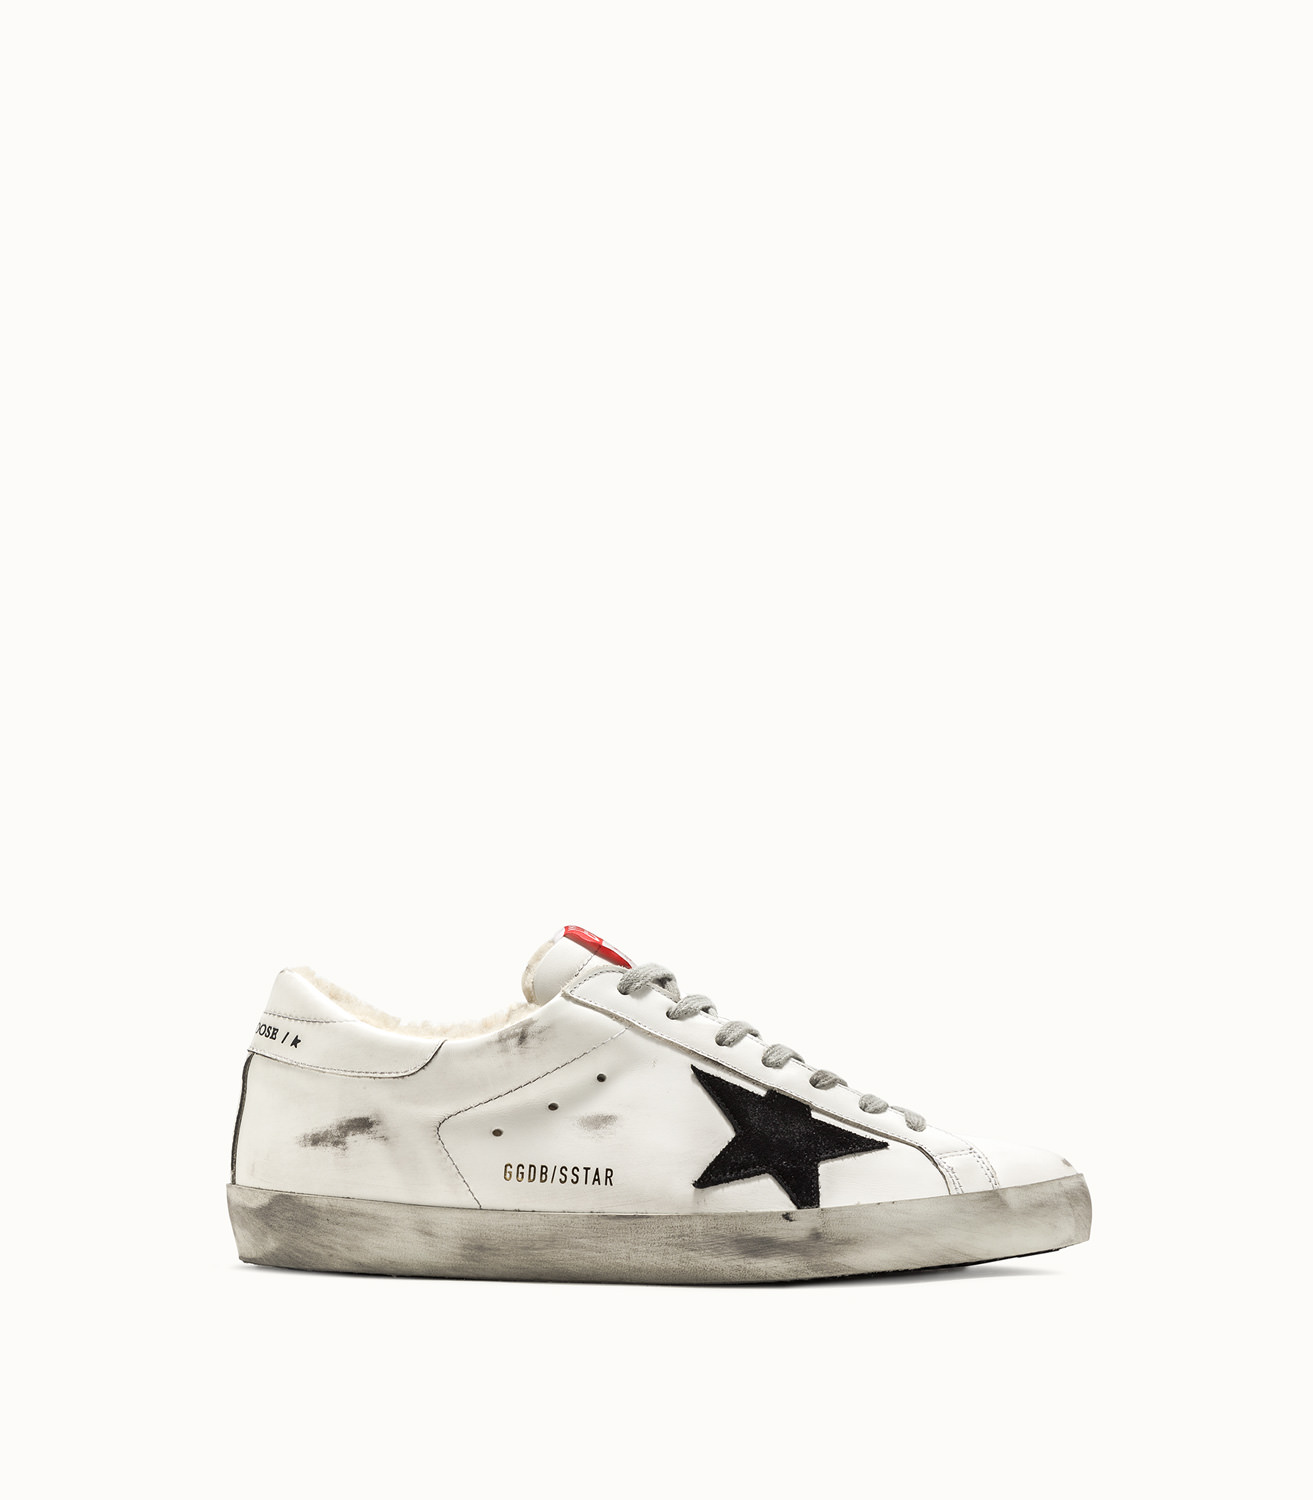 golden goose sneakers with shearling